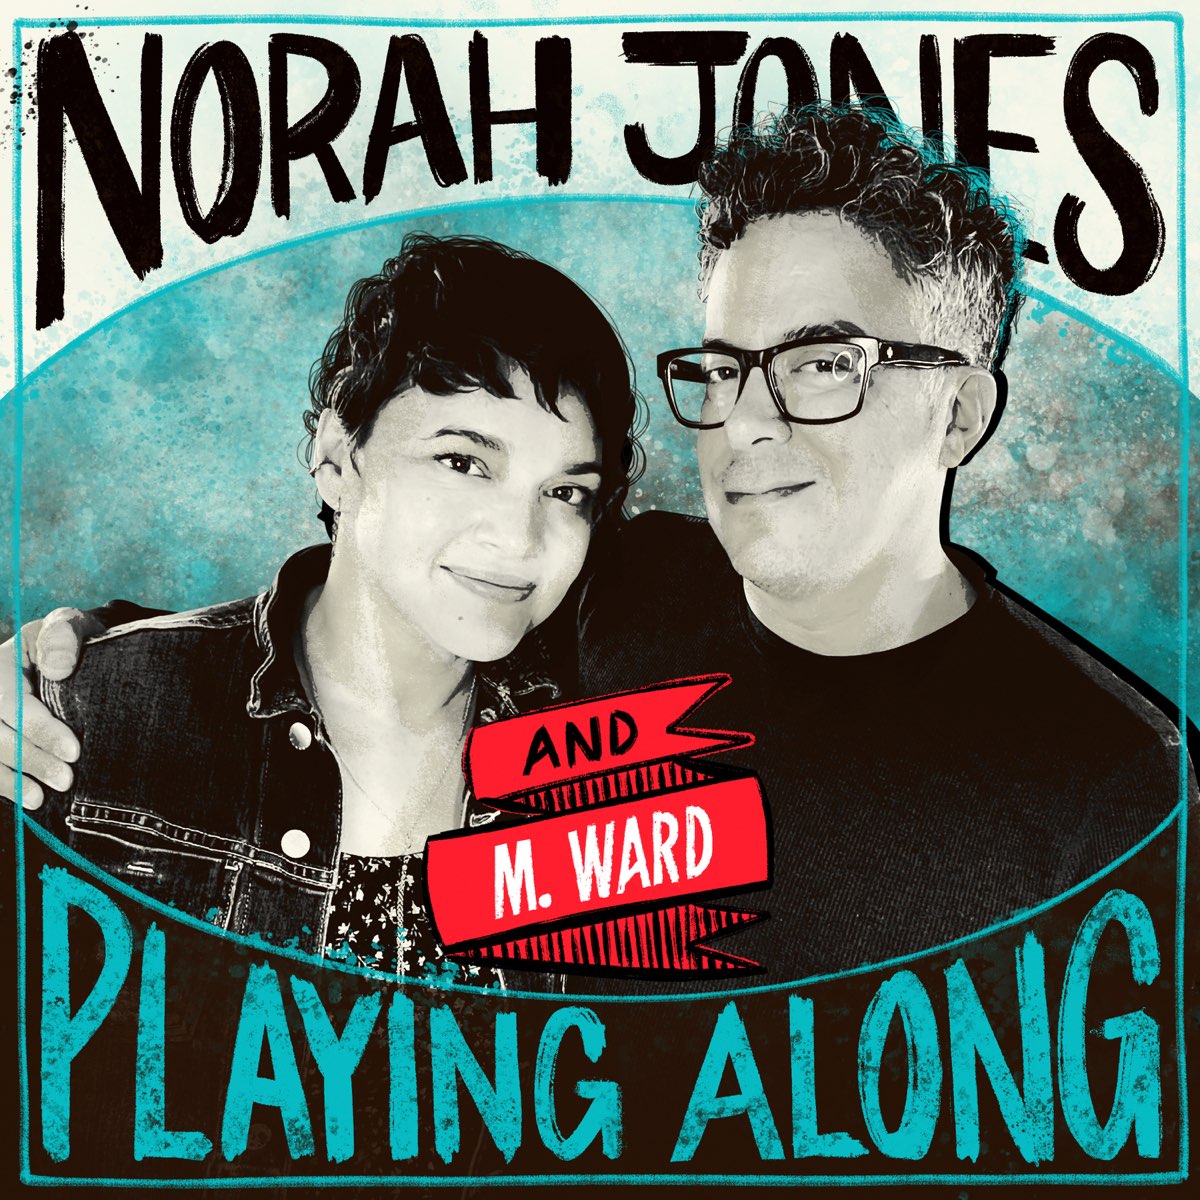 ‎Lifeline (From “Norah Jones is Playing Along” Podcast) [feat. M. Ward ...